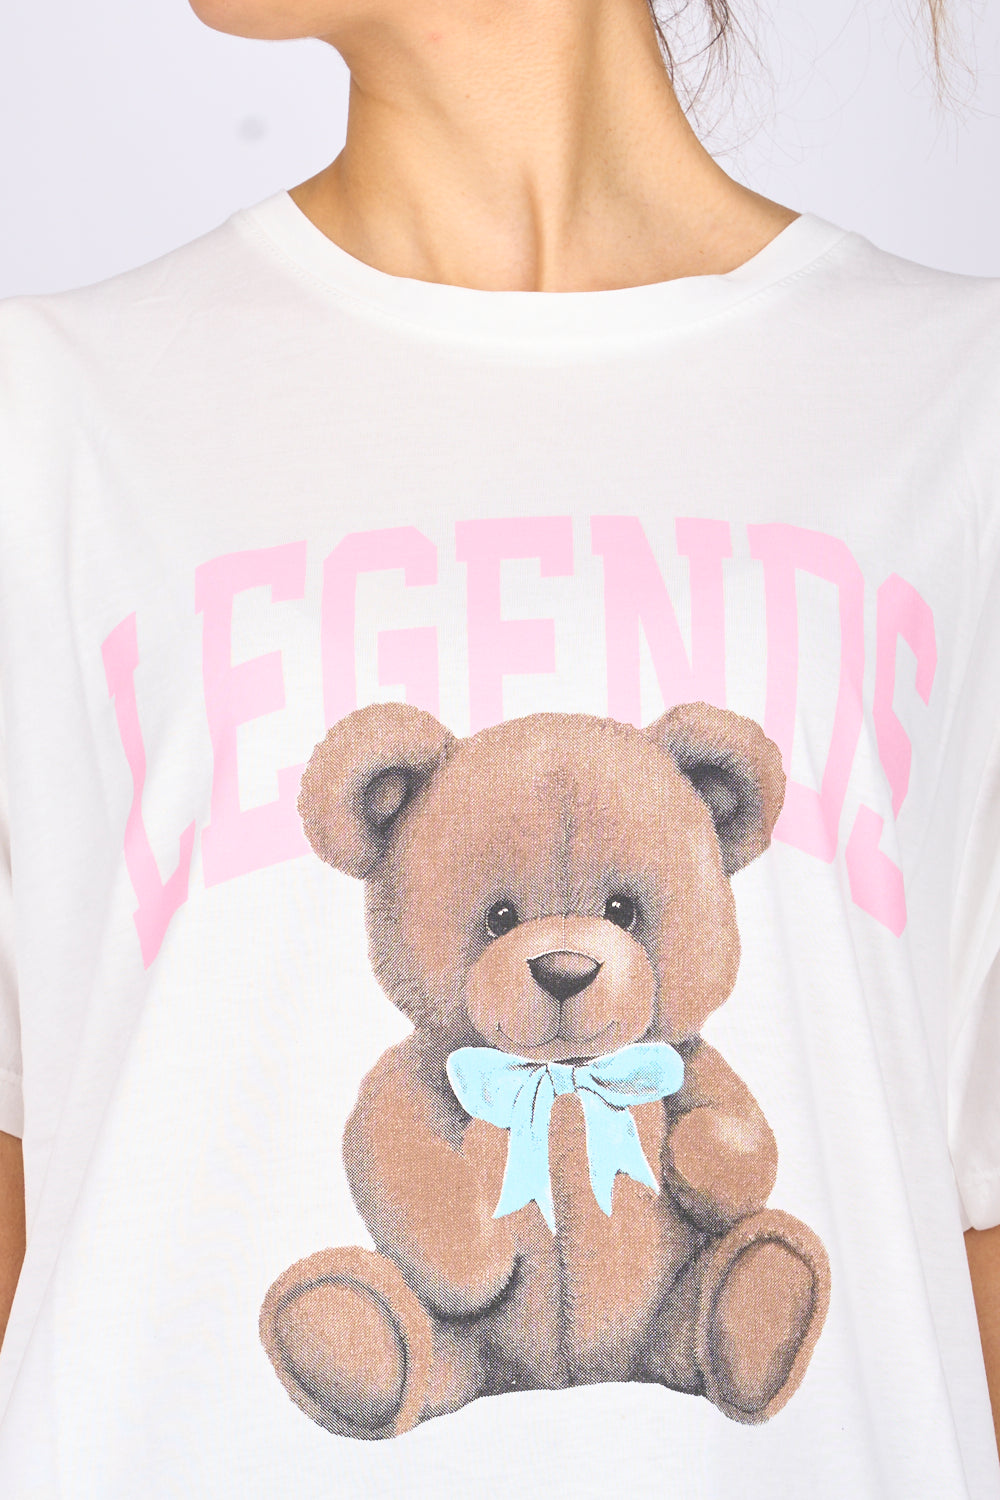 VICOLO - RB0403 - T-SHIRT STAMPA ORSO LEGENDS